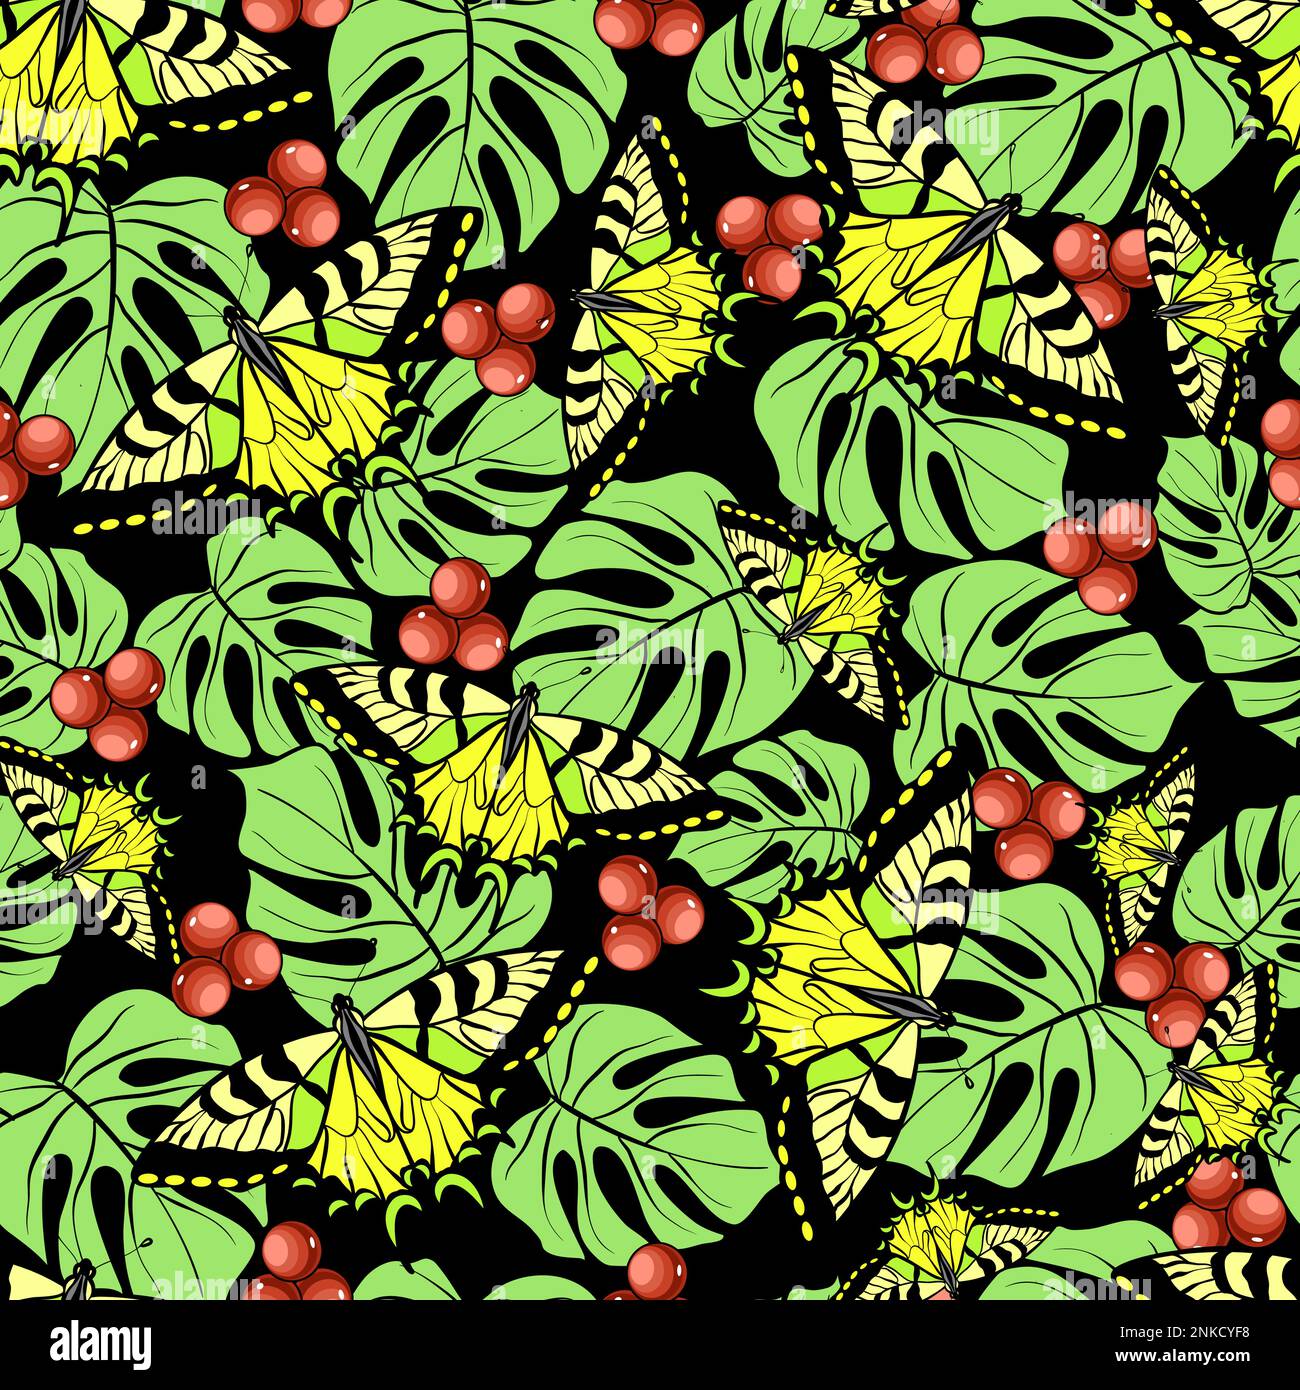 Seamless floral pattern with tiger swallowtail butterflies and monstera leaves with holly berries vector illustration Stock Vector